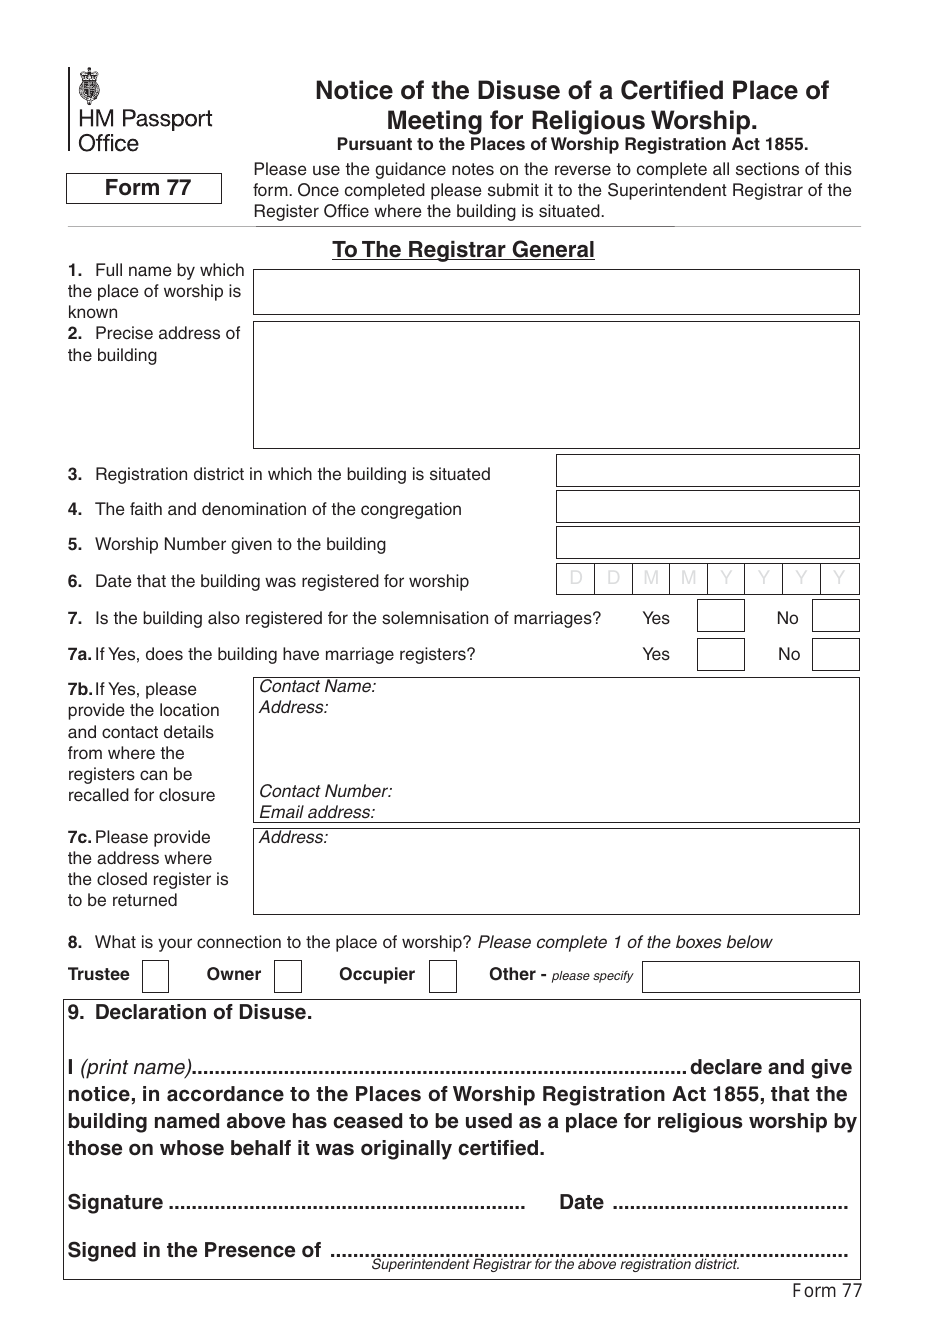 Form 77 Notice of the Disuse of a Certifi Ed Place of Meeting for Religious Worship - United Kingdom, Page 1